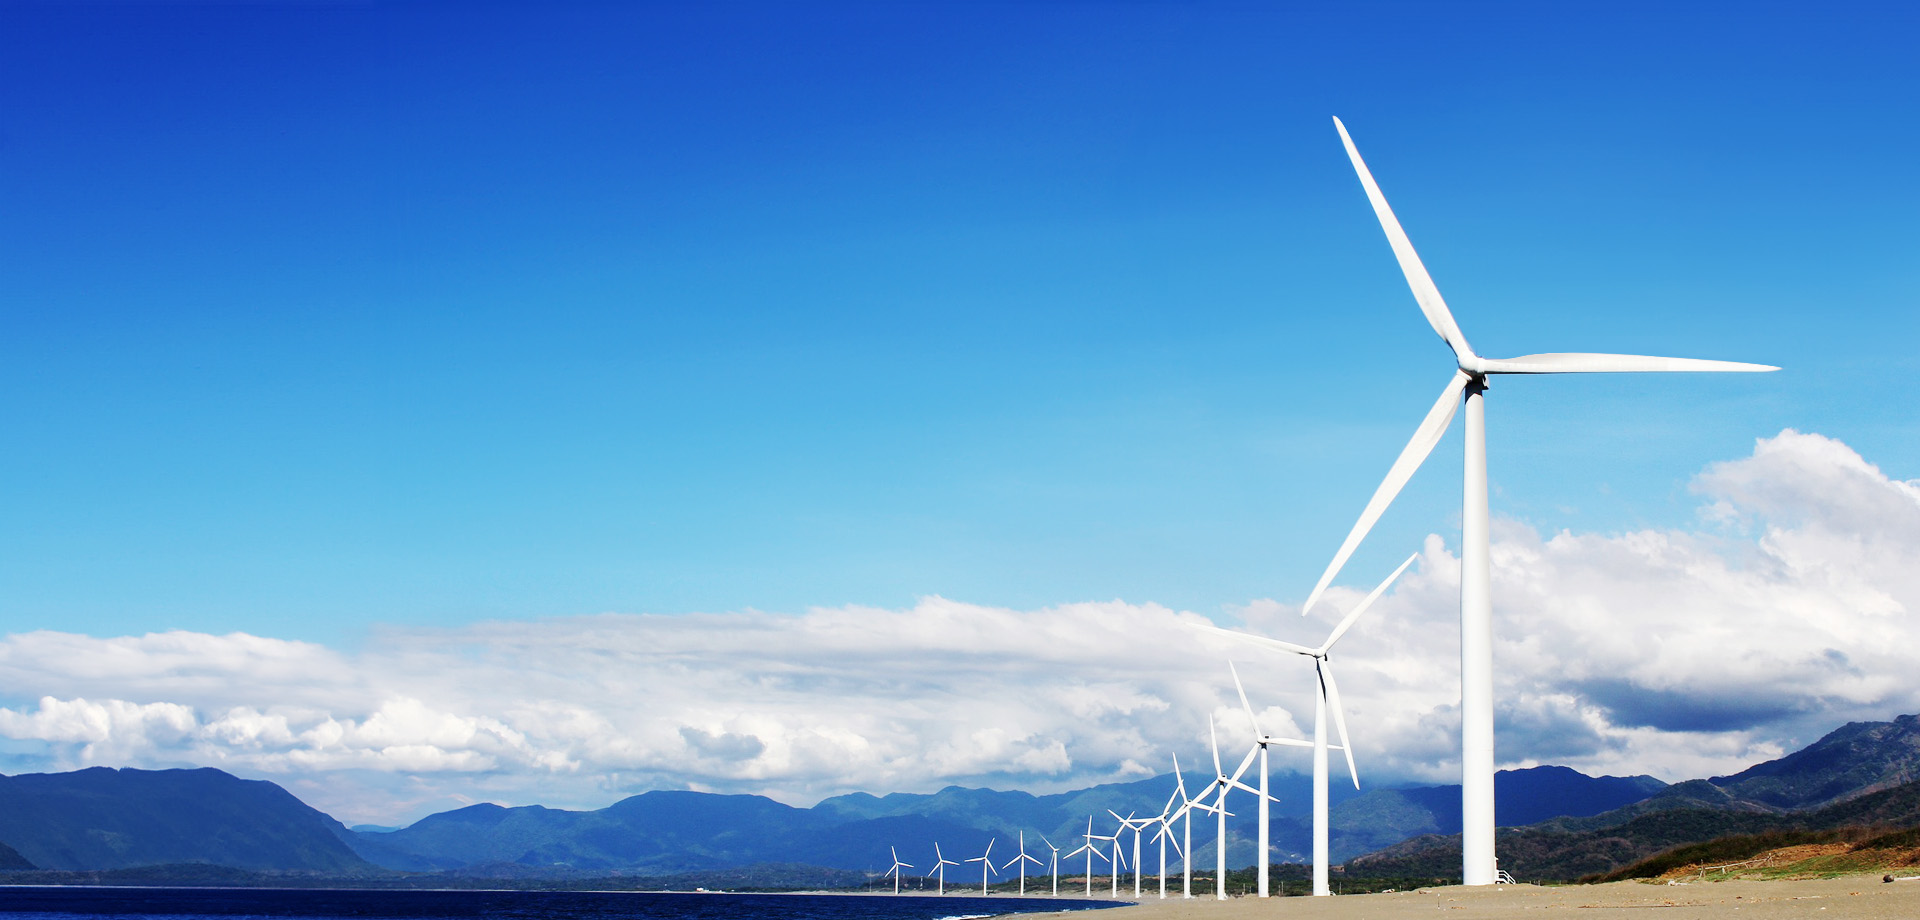 Green wind energy empowers the future